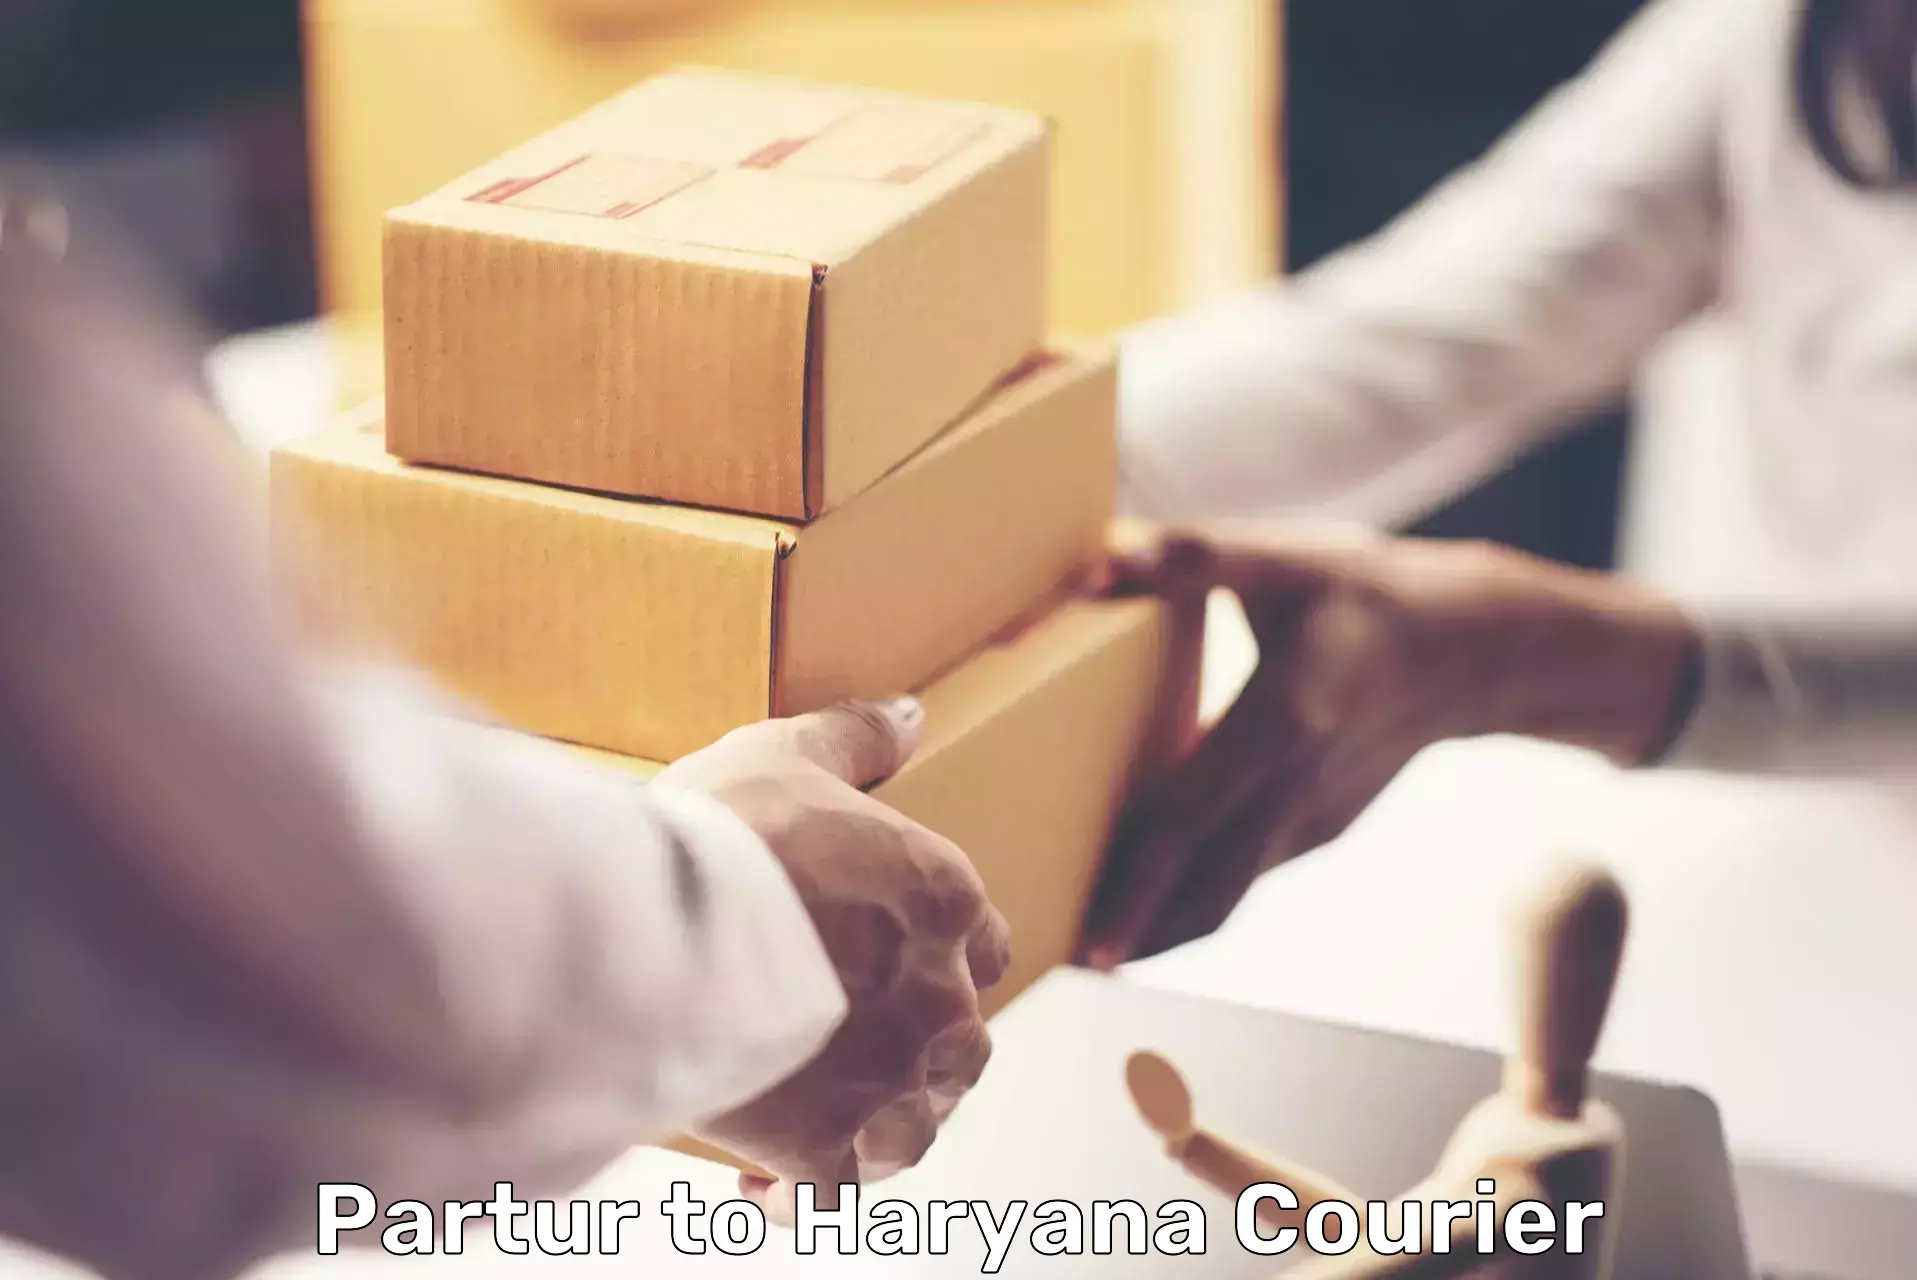 Fast shipping solutions Partur to Haryana